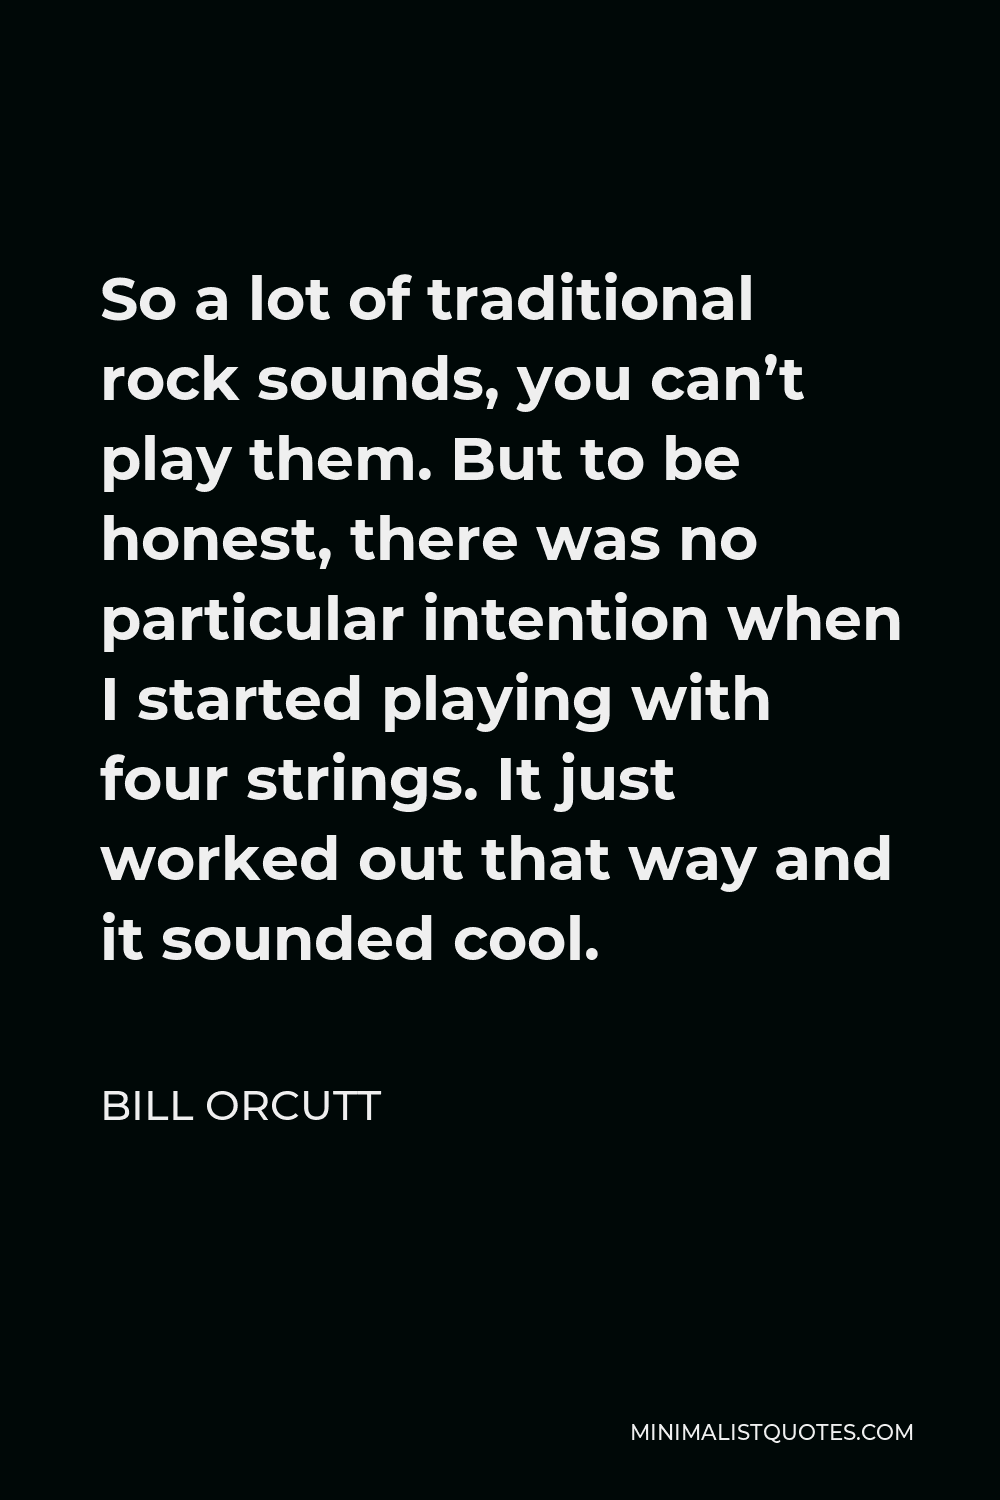 Bill Orcutt Quote - So a lot of traditional rock sounds, you can’t play them. But to be honest, there was no particular intention when I started playing with four strings. It just worked out that way and it sounded cool.